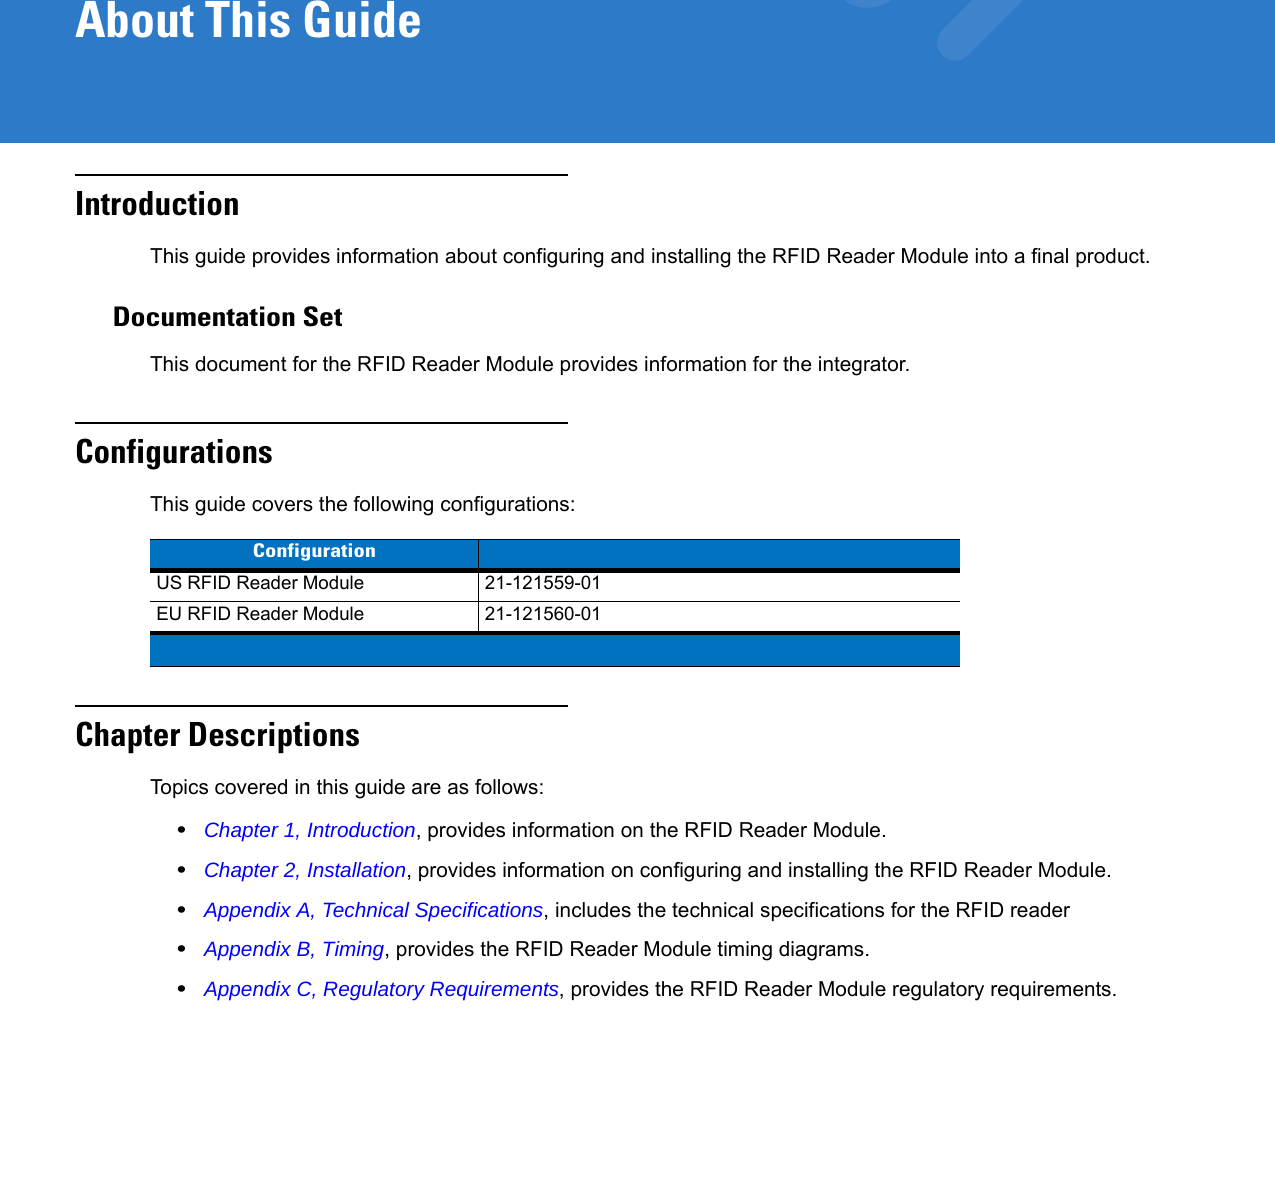 About This GuideIntroductionThis guide provides information about configuring and installing the RFID Reader Module into a final product.Documentation SetThis document for the RFID Reader Module provides information for the integrator. ConfigurationsThis guide covers the following configurations:Chapter DescriptionsTopics covered in this guide are as follows:•Chapter 1, Introduction, provides information on the RFID Reader Module.•Chapter 2, Installation, provides information on configuring and installing the RFID Reader Module.•Appendix A, Technical Specifications, includes the technical specifications for the RFID reader•Appendix B, Timing, provides the RFID Reader Module timing diagrams.•Appendix C, Regulatory Requirements, provides the RFID Reader Module regulatory requirements.ConfigurationUS RFID Reader Module 21-121559-01EU RFID Reader Module 21-121560-01